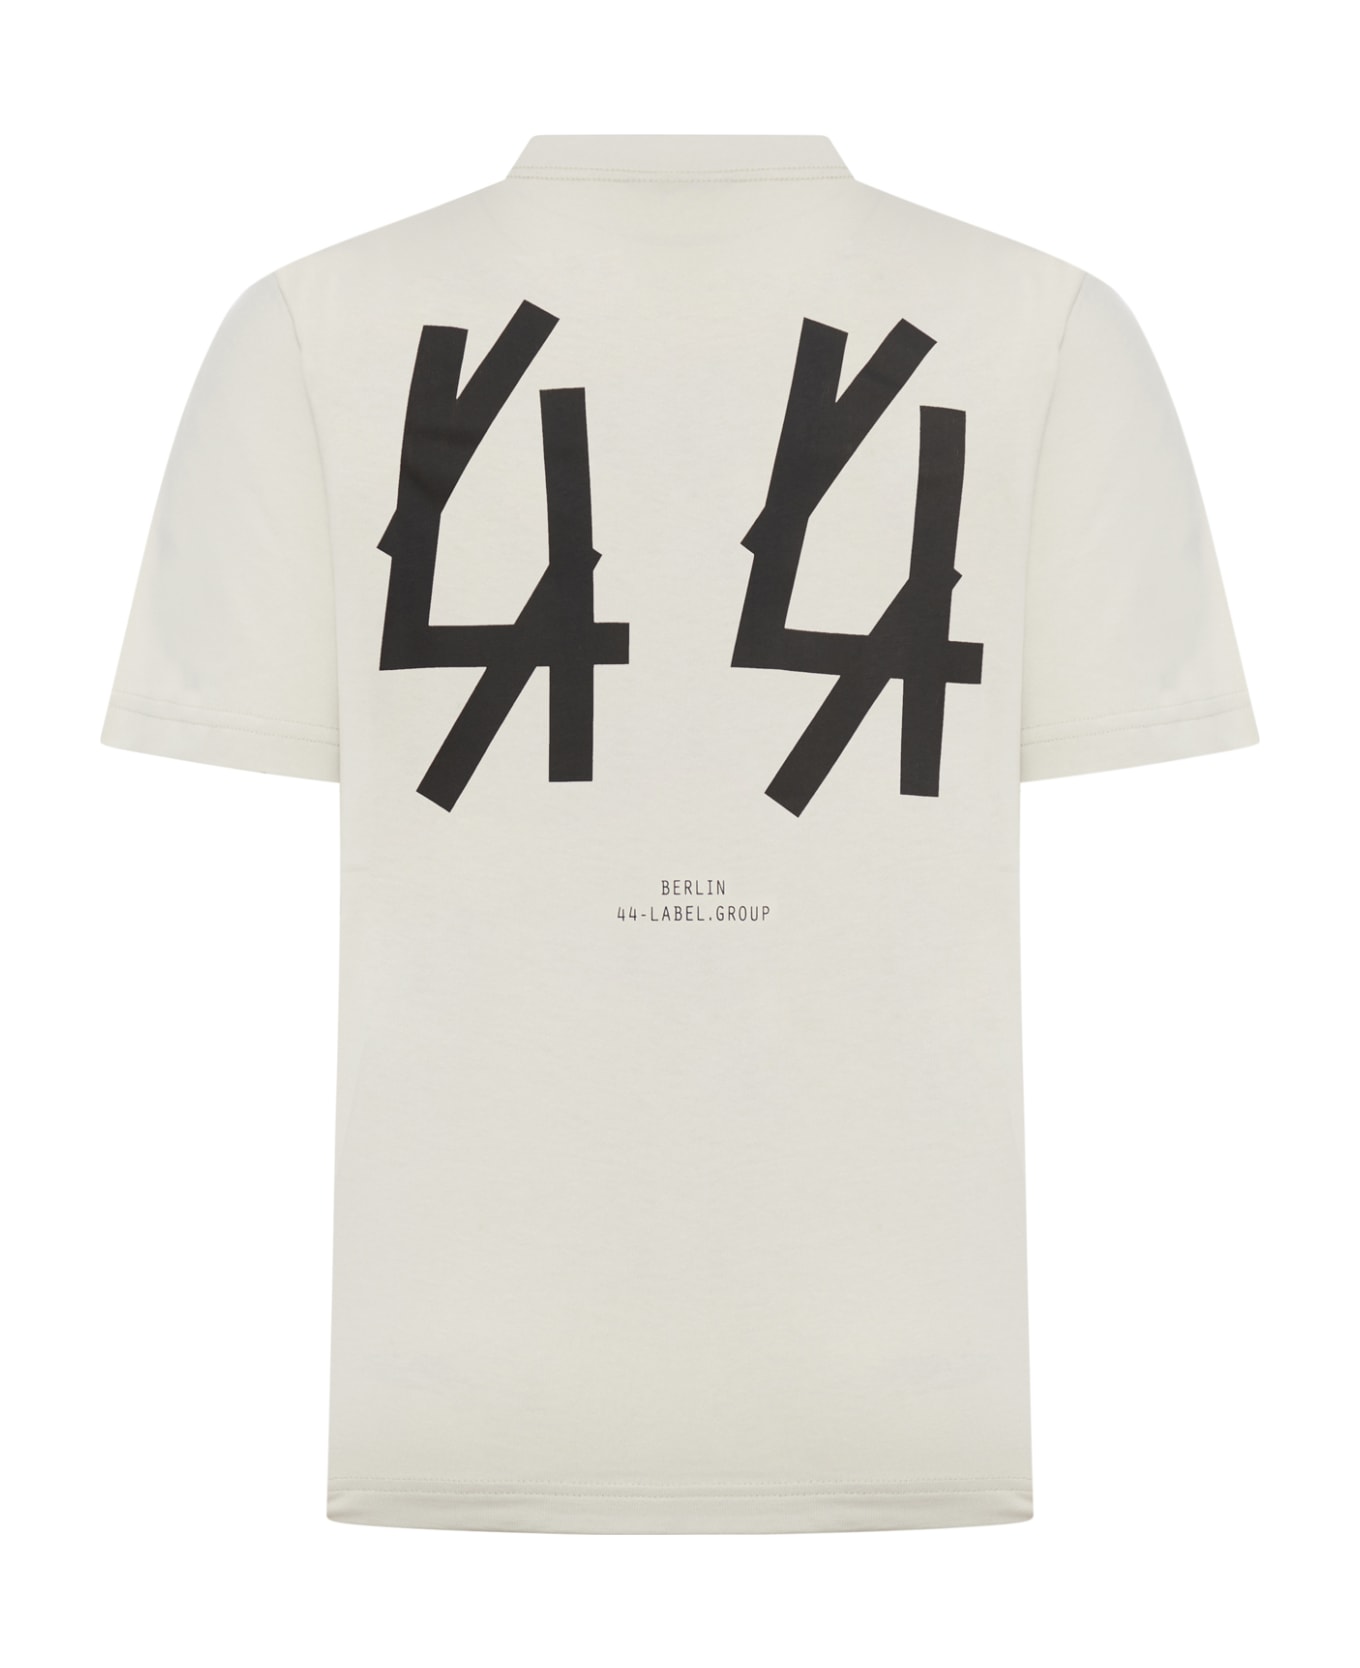 44 Label Group Classic Tee - Solid Black シャツ